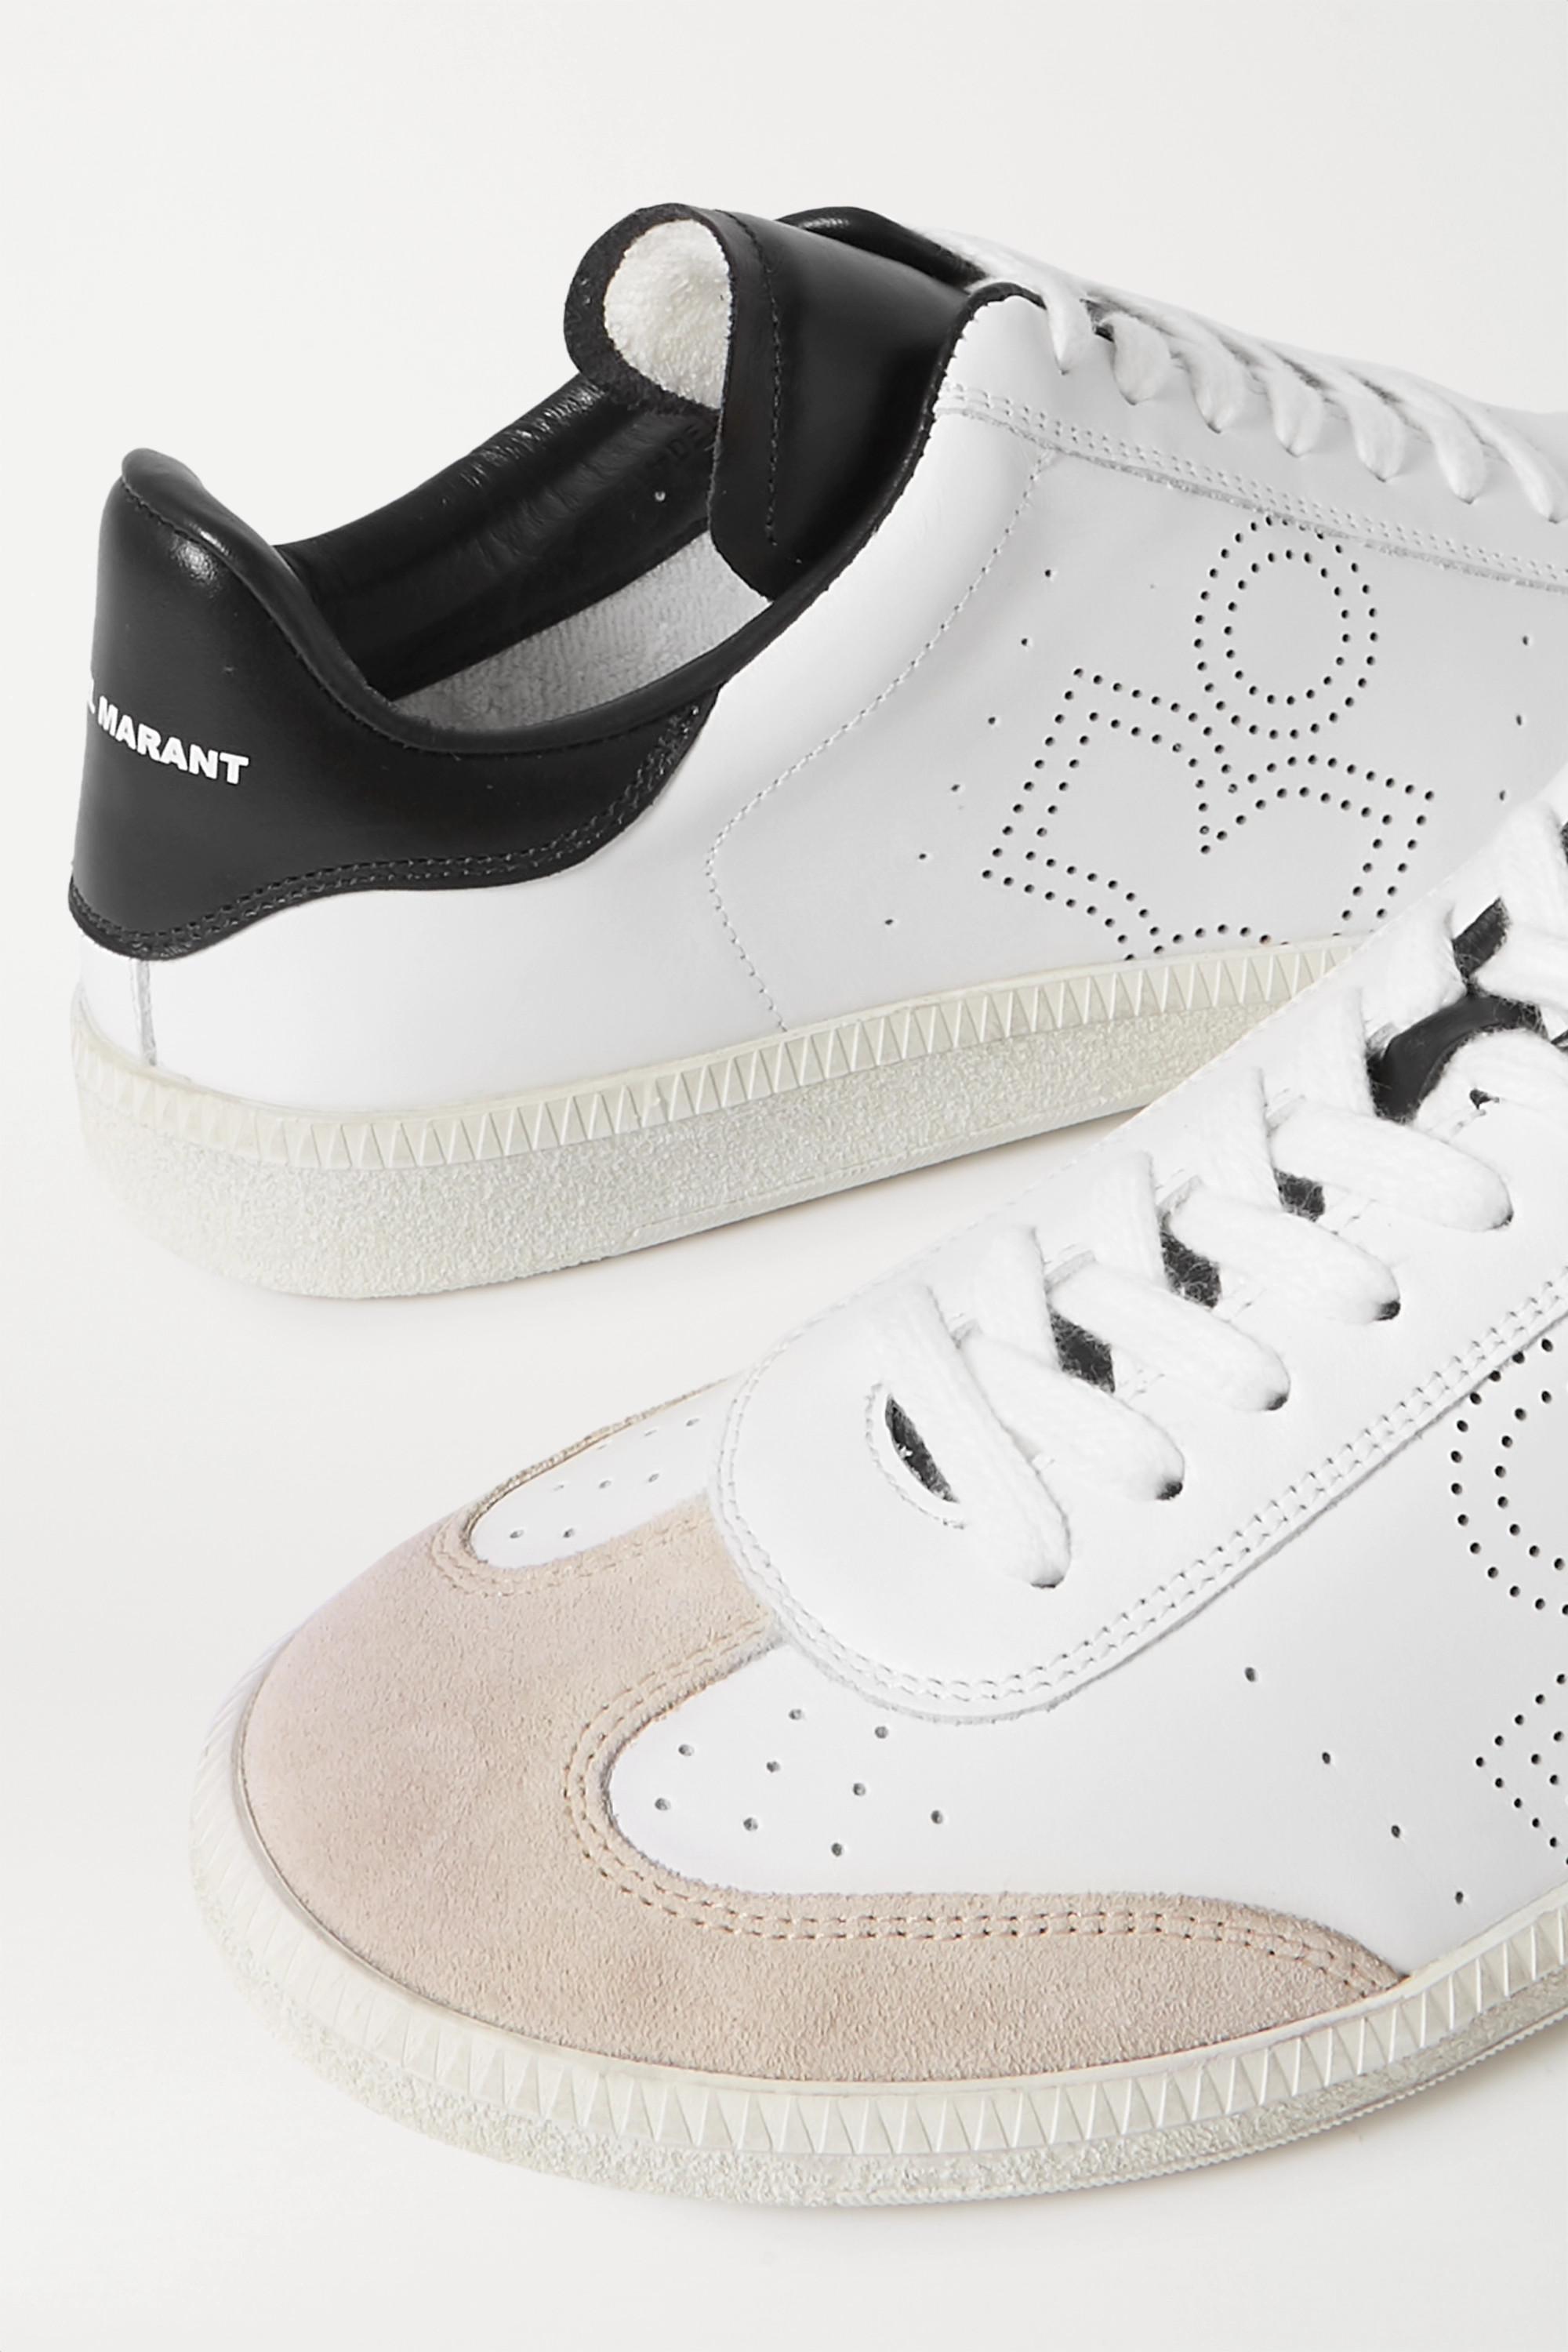 Isabel Marant Bryce Suede-trimmed Perforated Leather Sneakers in White Lyst